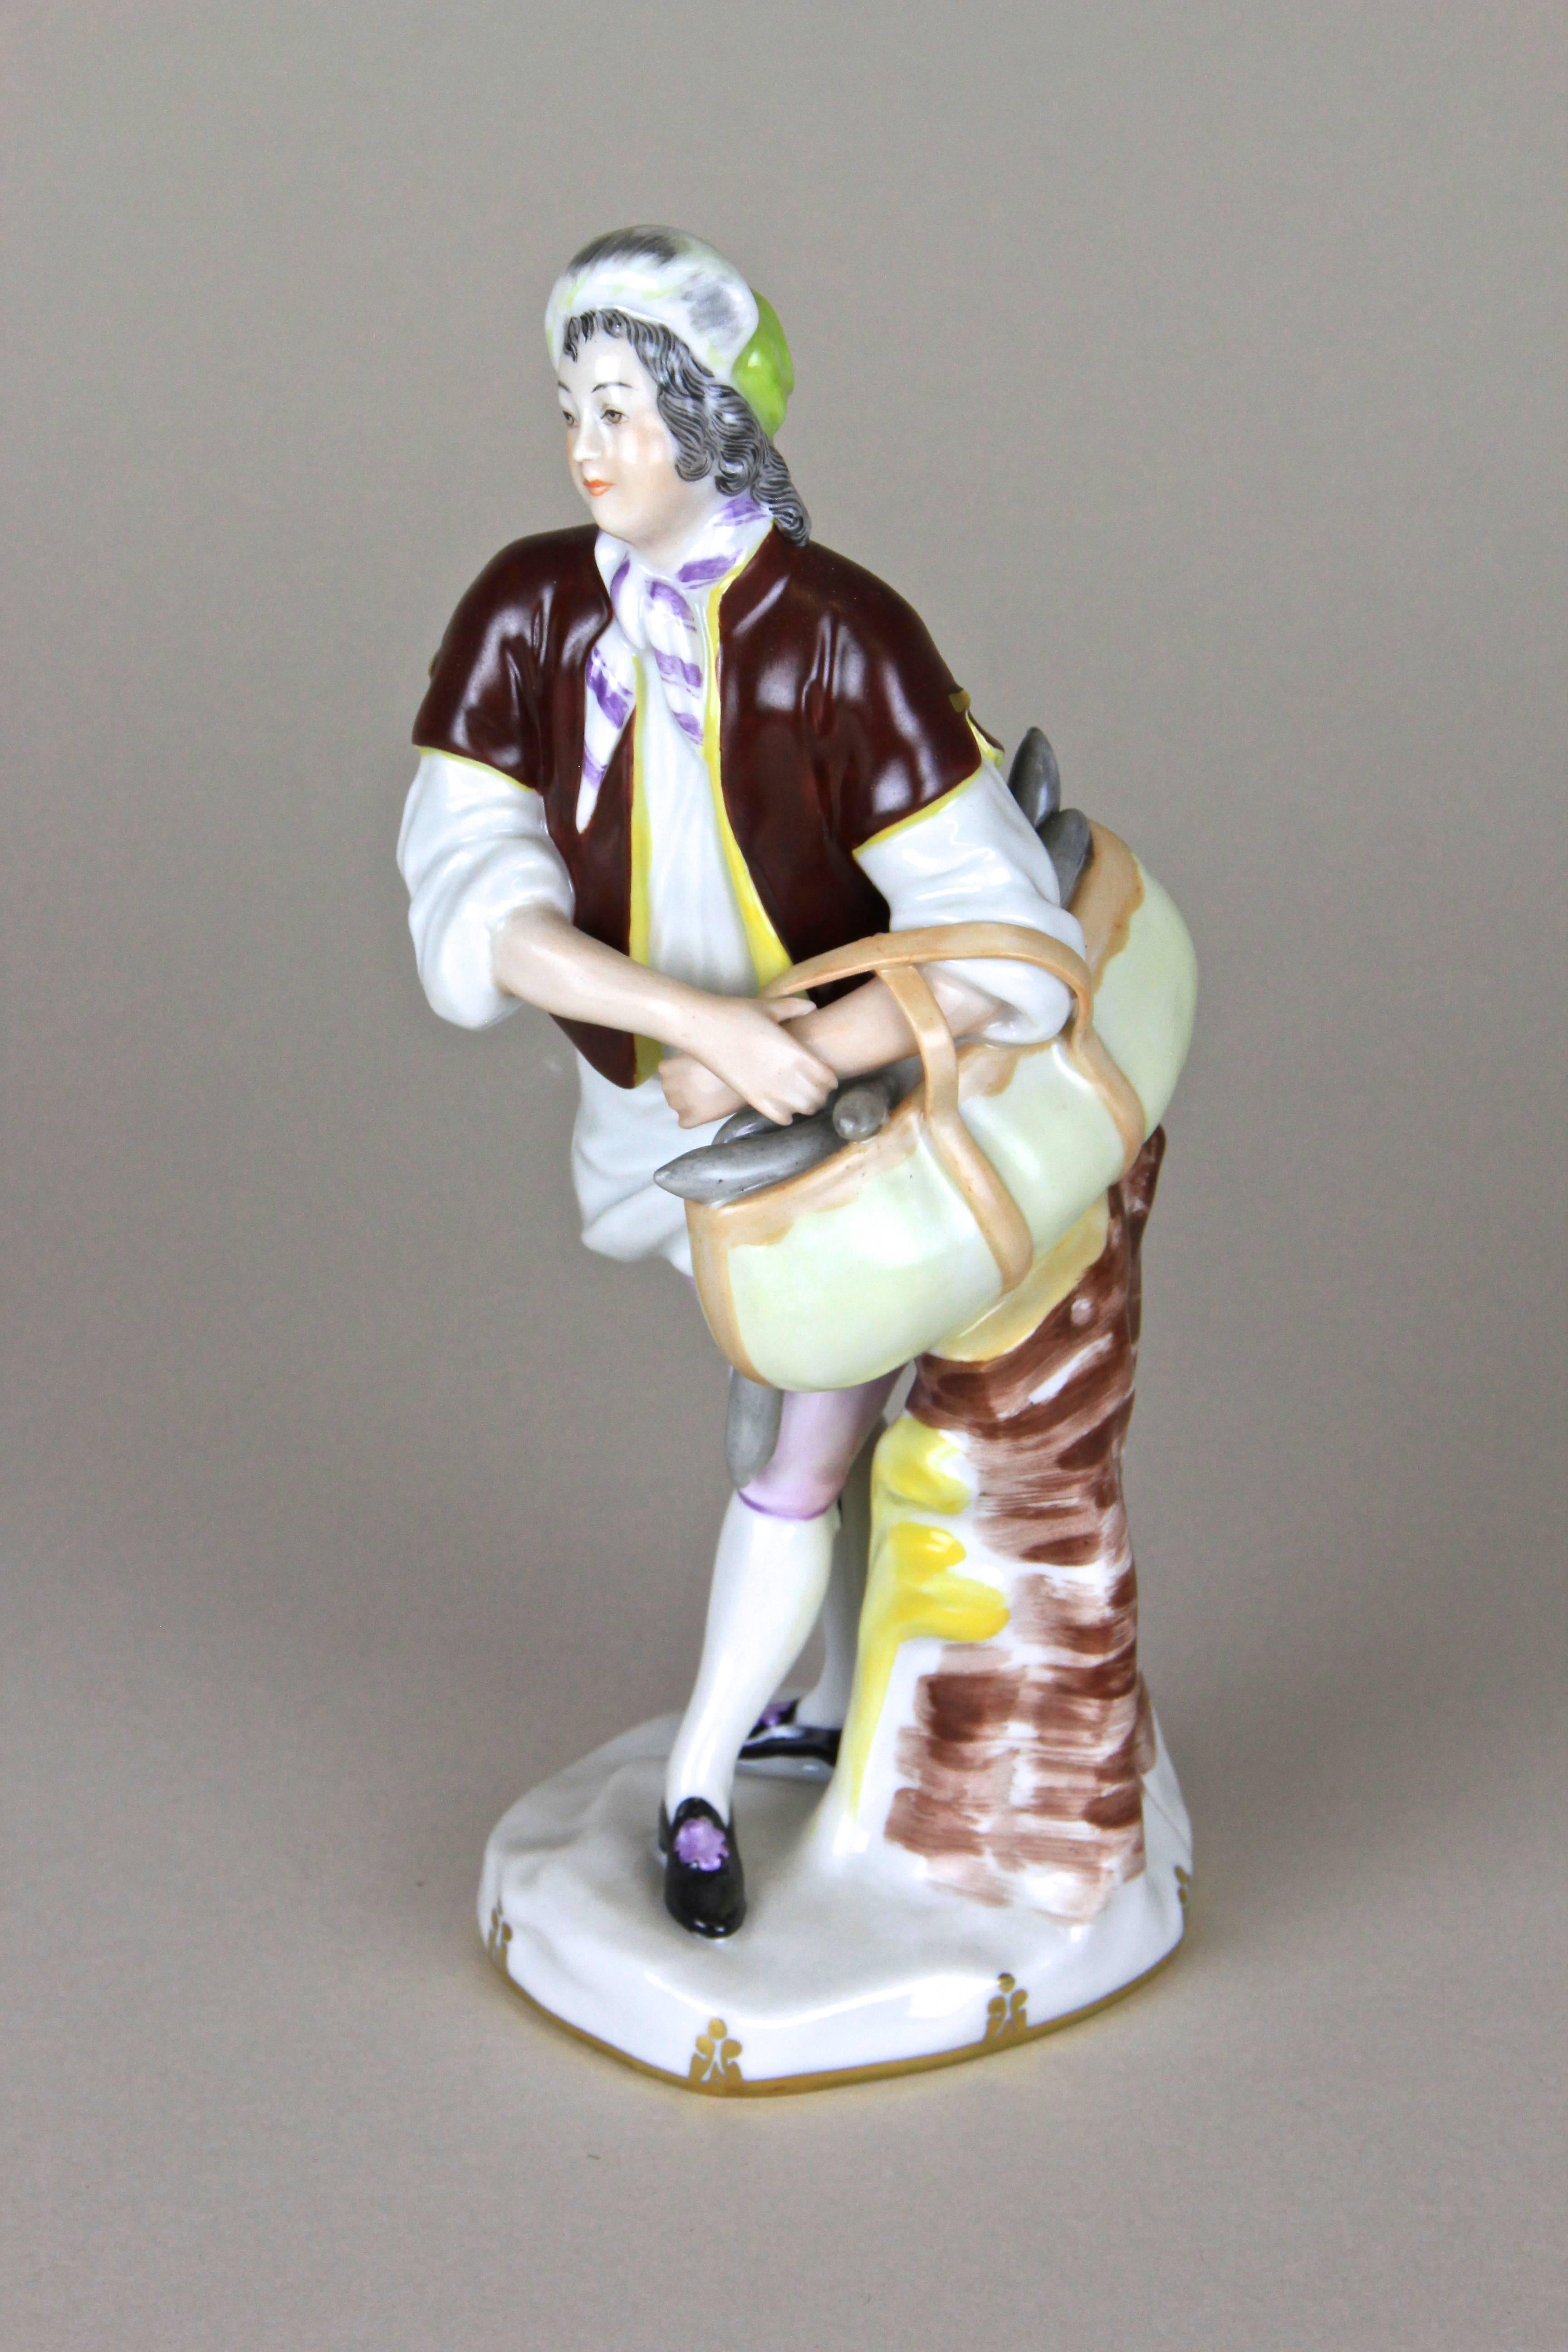 Another fine porcelain figurine out of the famous porcelain manufactures Augarten from Vienna Austria, circa 1950. The so-called 